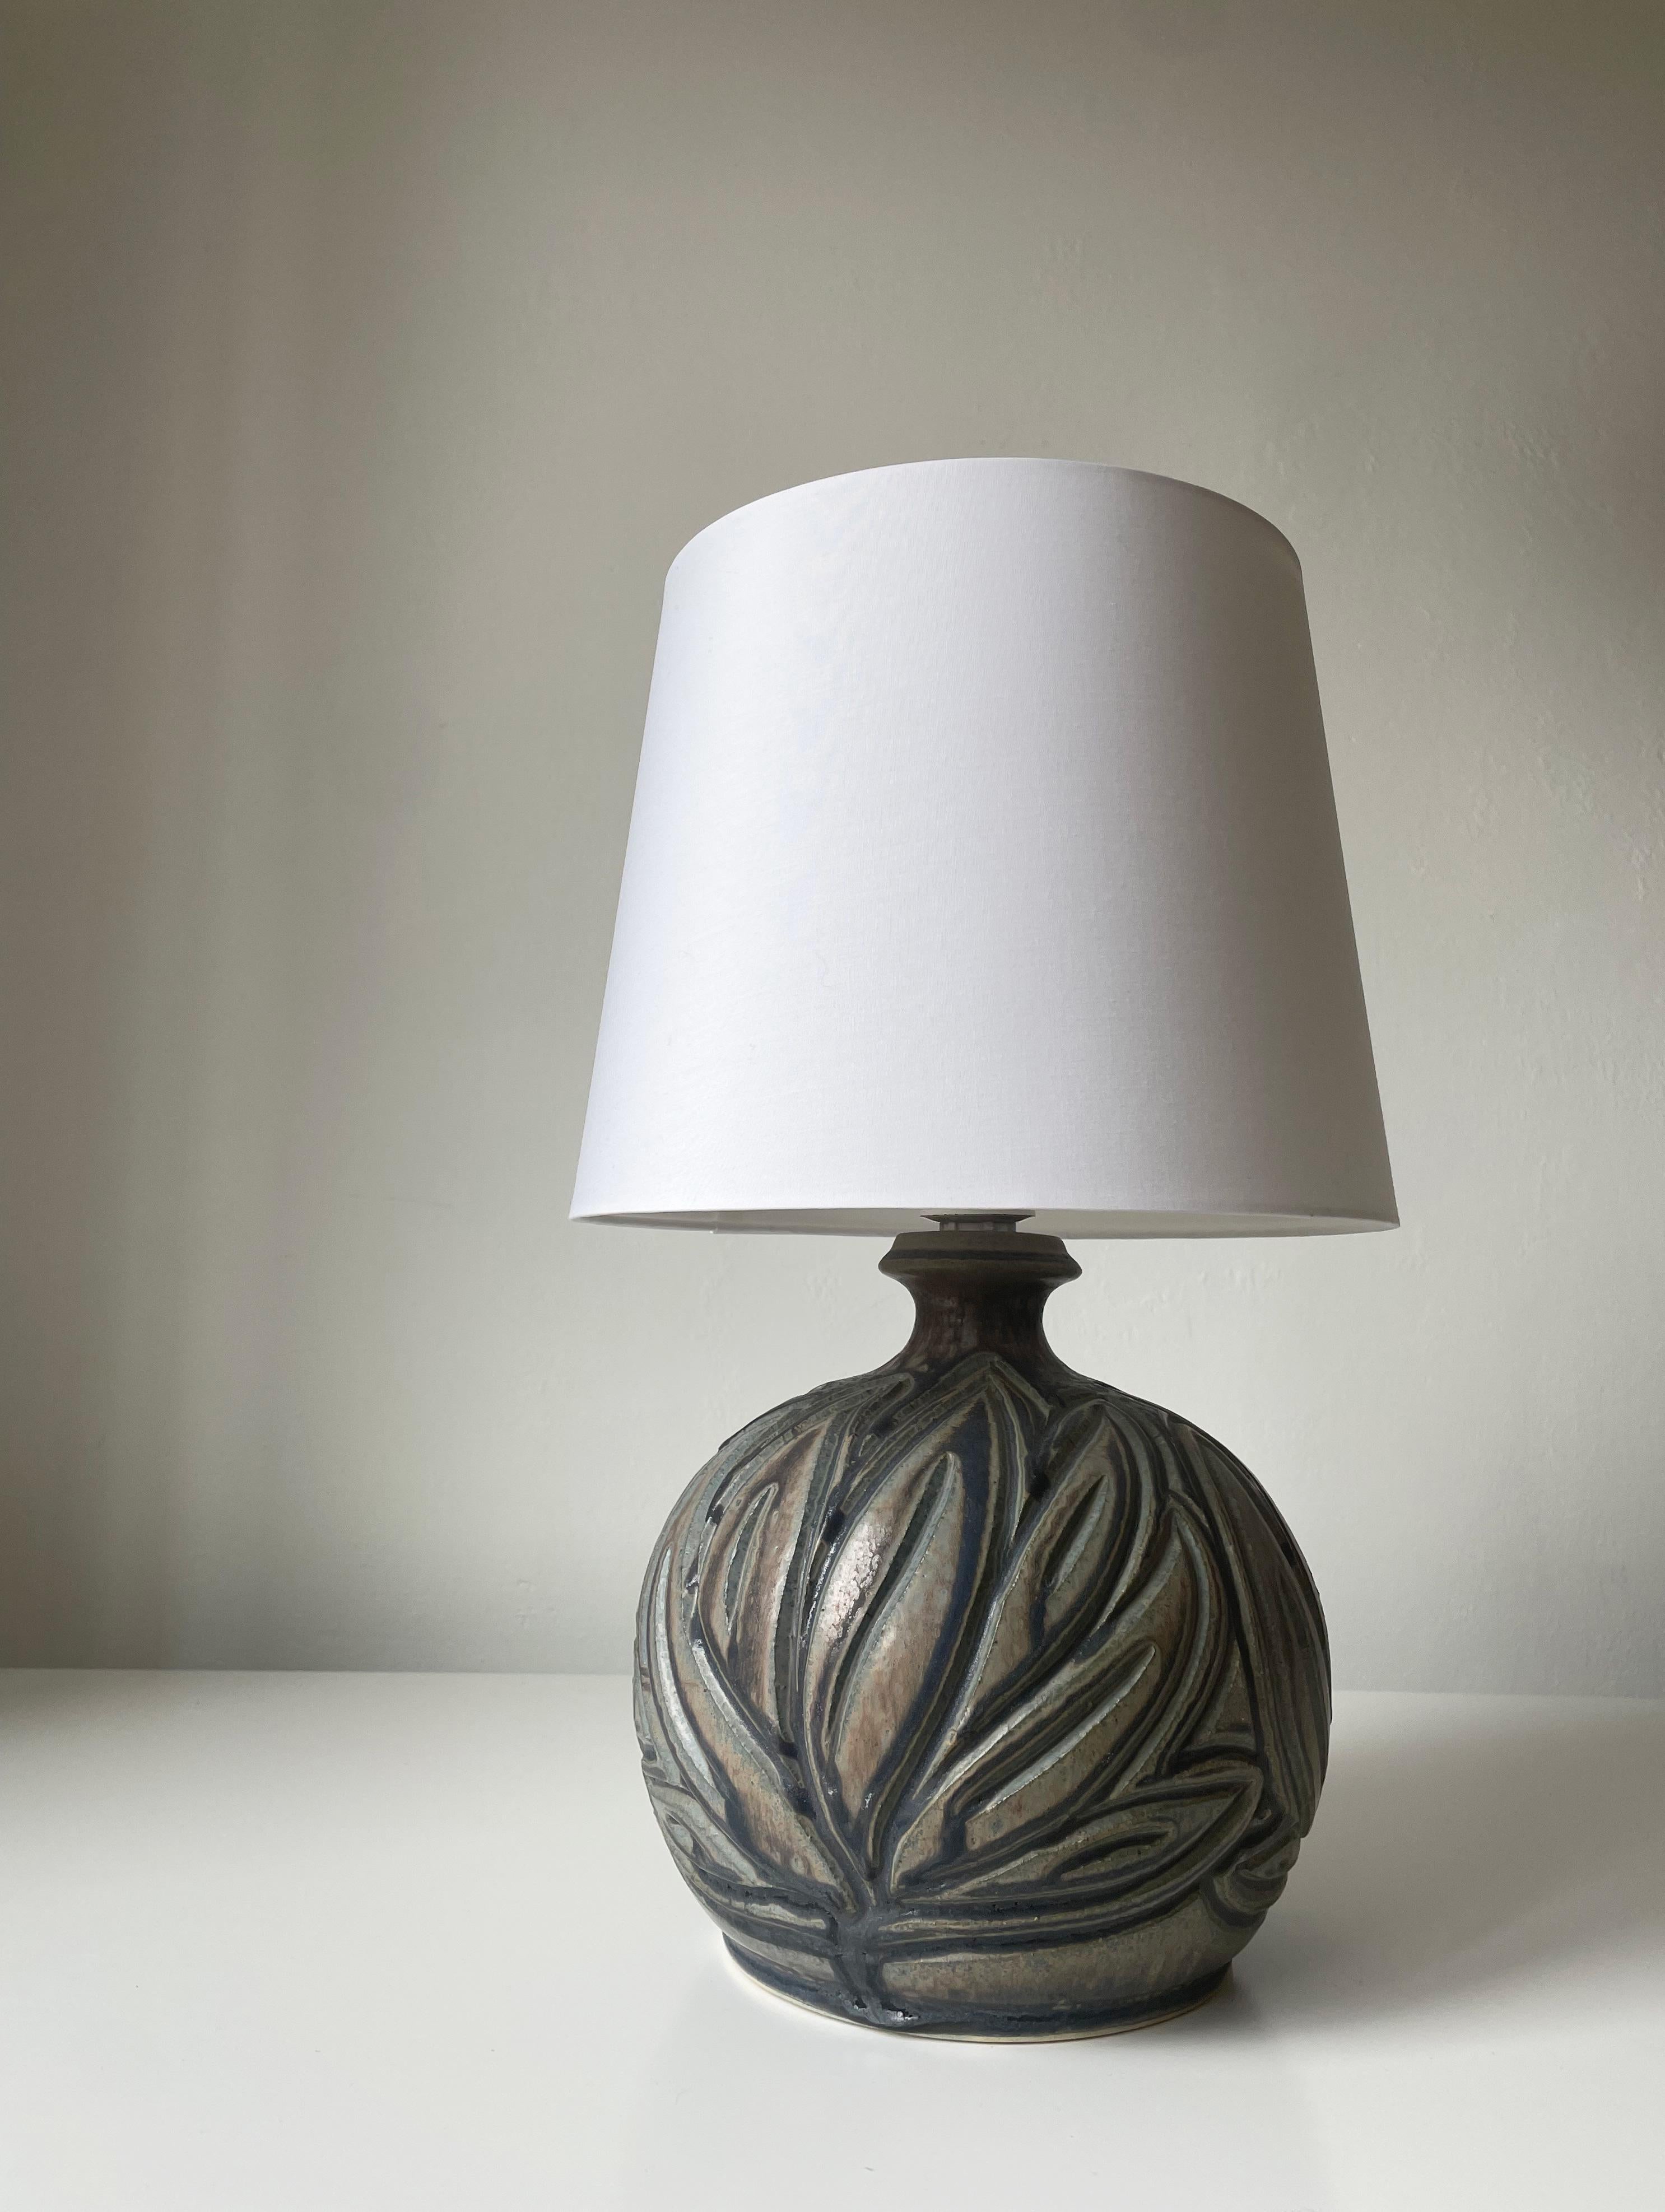 Soft shaped Scandinavian modern stoneware table lamp with large organic leaf like incised relief decorations glazed beautifully in shades of gray, brown, blue, green and anthracite with a slight sheen. Short slender neck with collar. Manufactured in